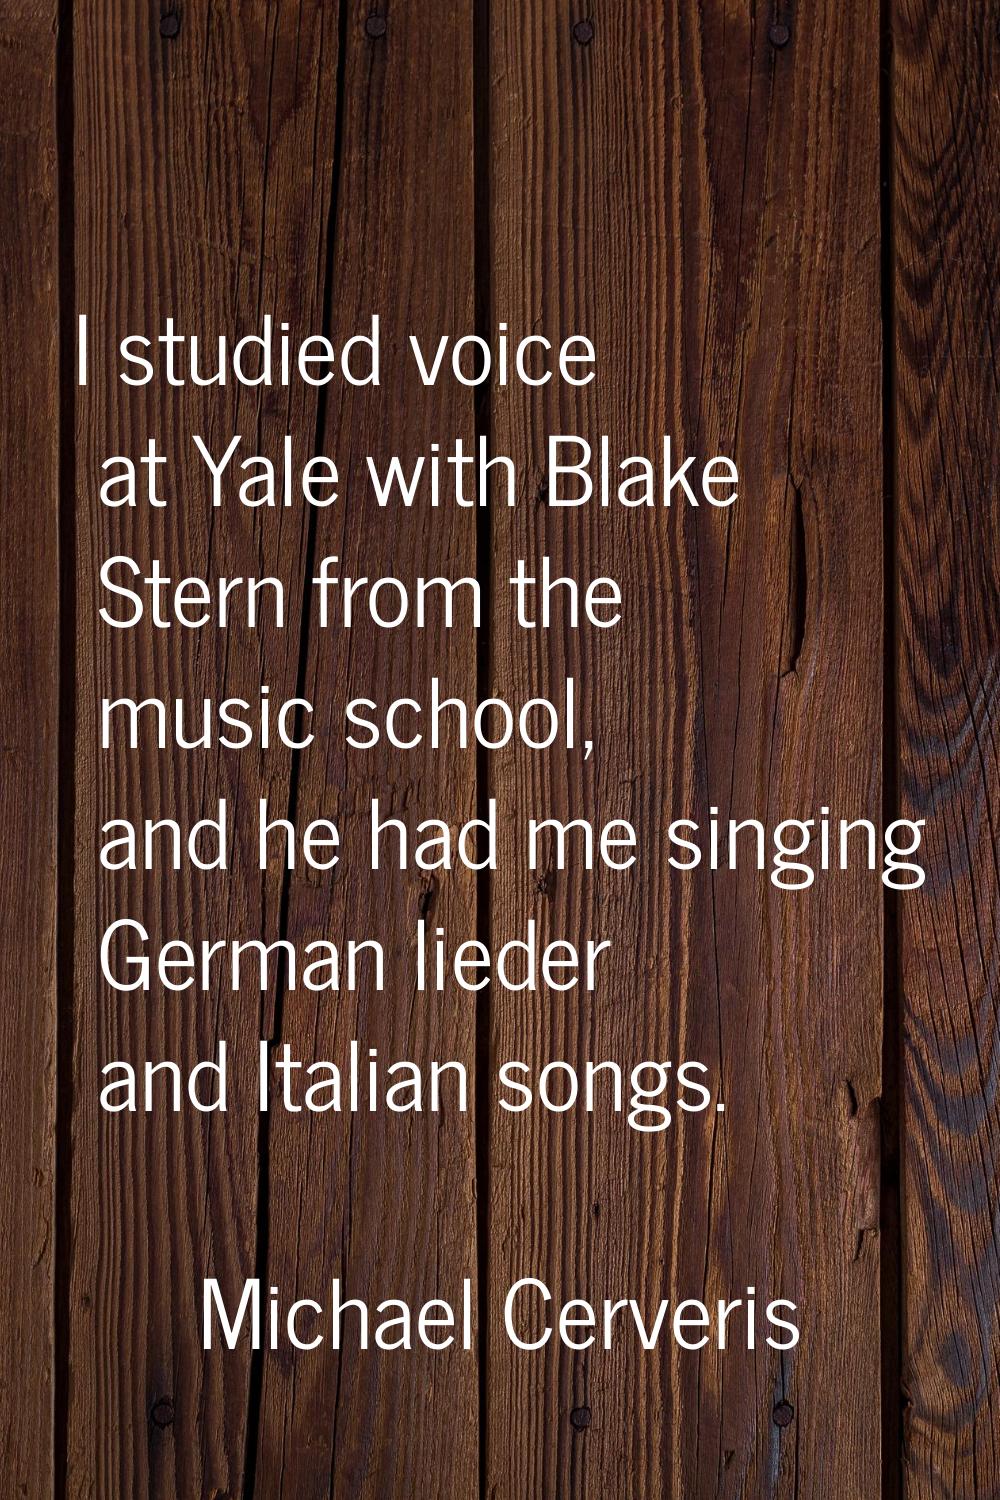 I studied voice at Yale with Blake Stern from the music school, and he had me singing German lieder